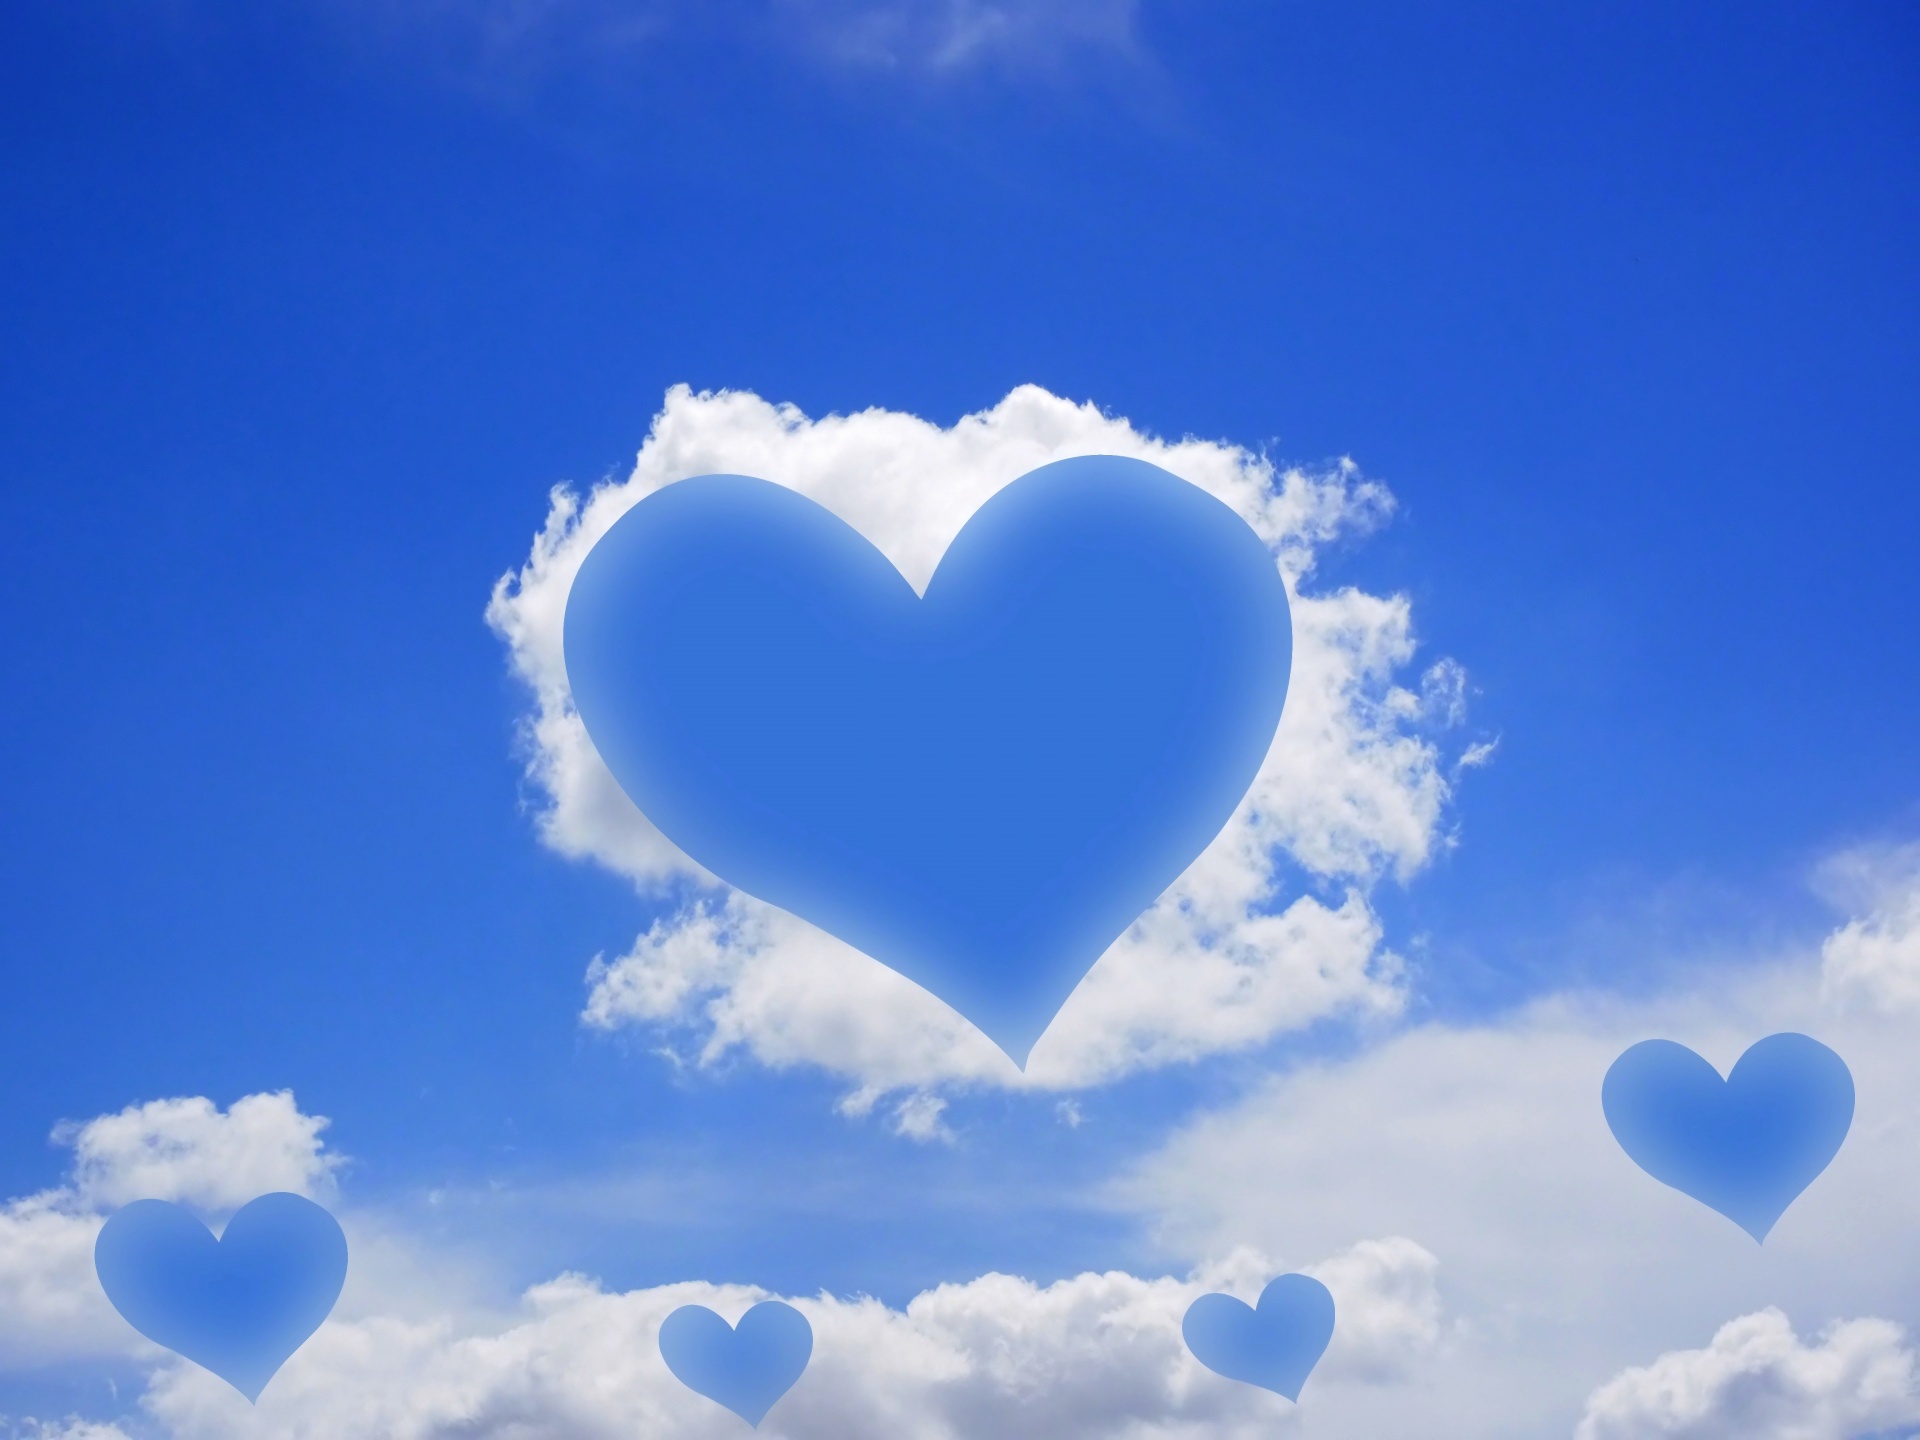 Download free photo of Clouds,sky,heart,hearts,love - from 